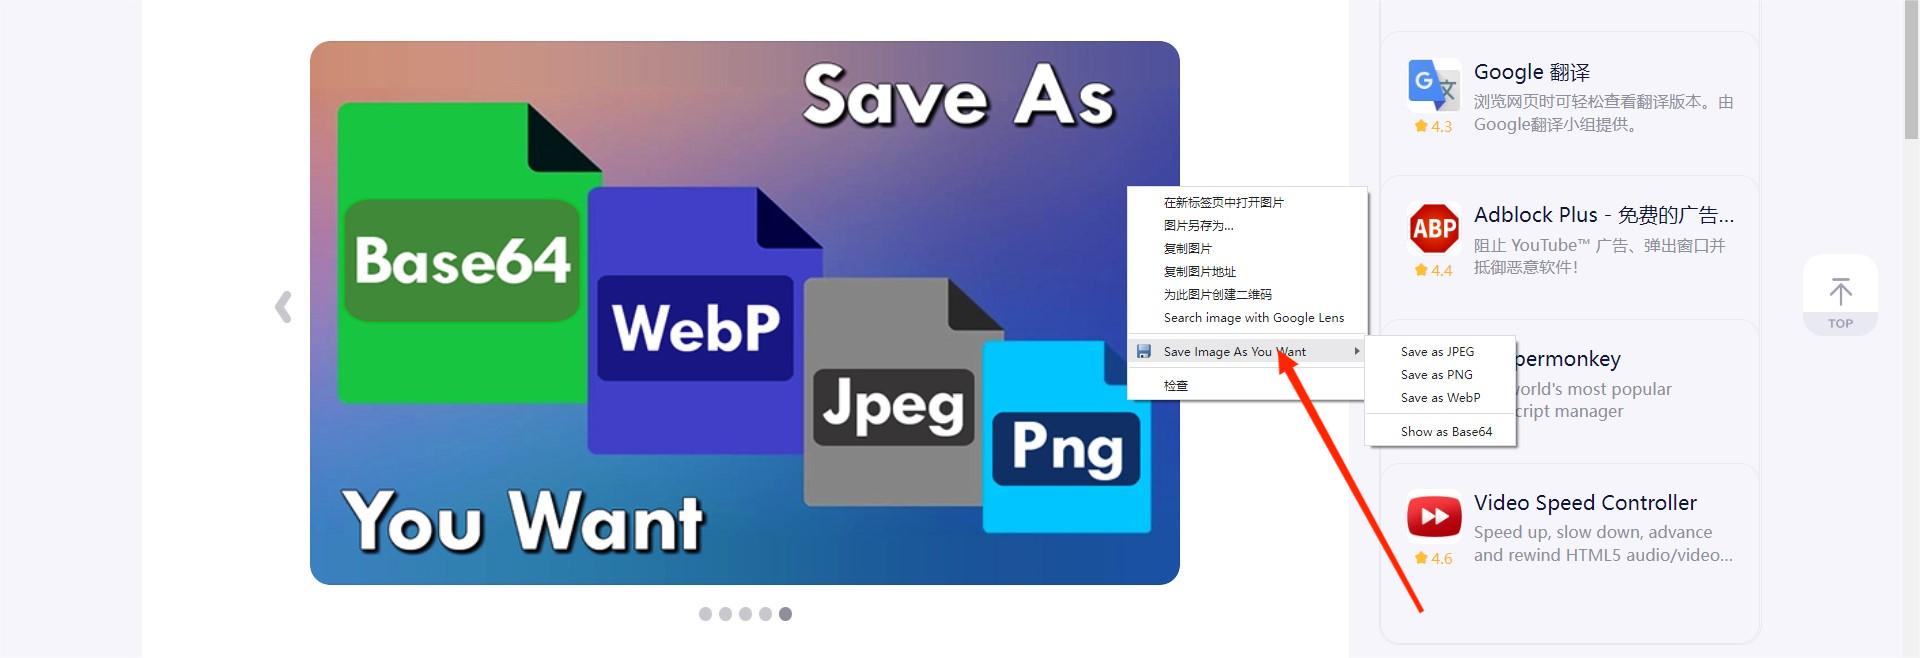 Save Image As You Want 插件使用教程